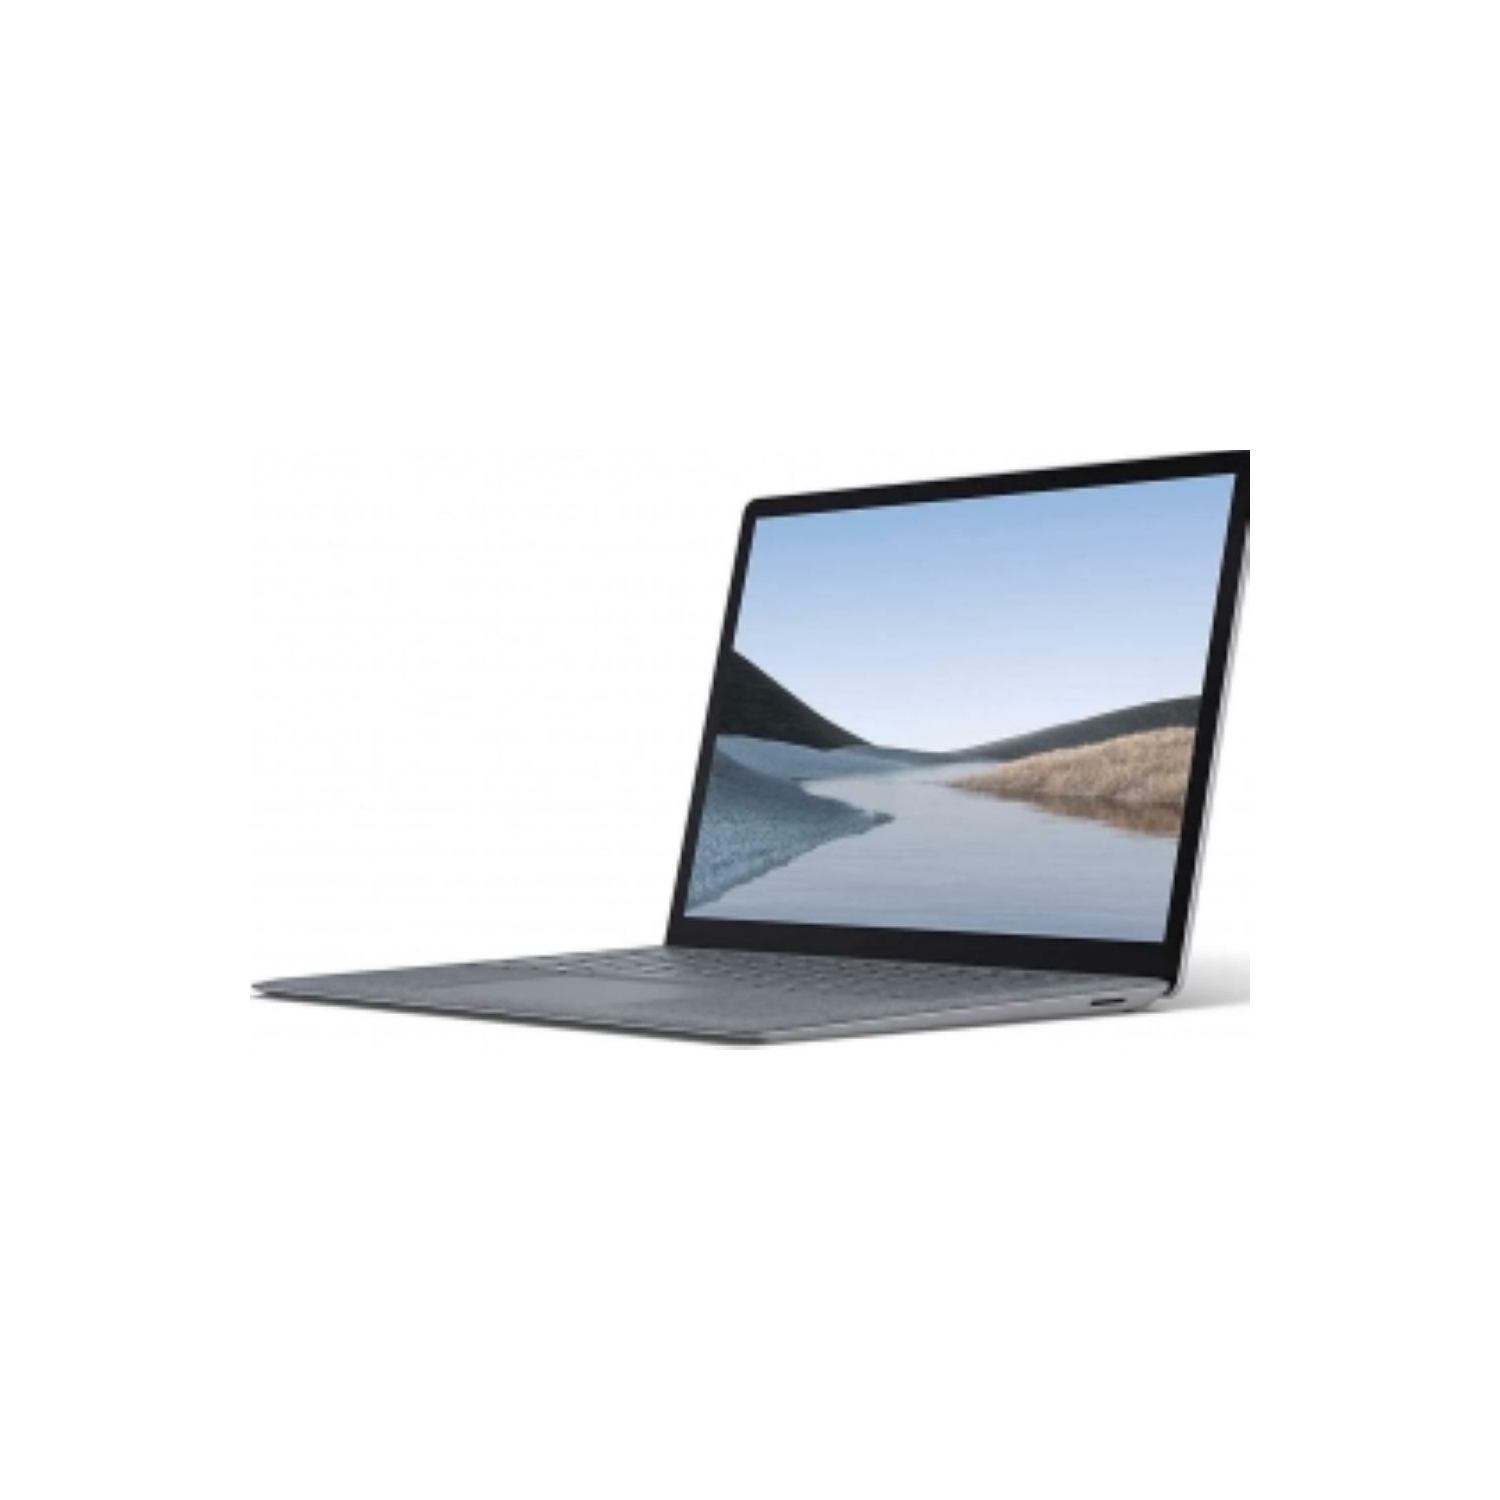 Refurbished (Excellent) - Microsoft Surface Laptop 3 Model 1867 Platinum Gray – 13.5" Touch-Screen, Intel Core i7-1065G7, 16GB, 256GB SSD, Windows 10 - 1 Year Warranty